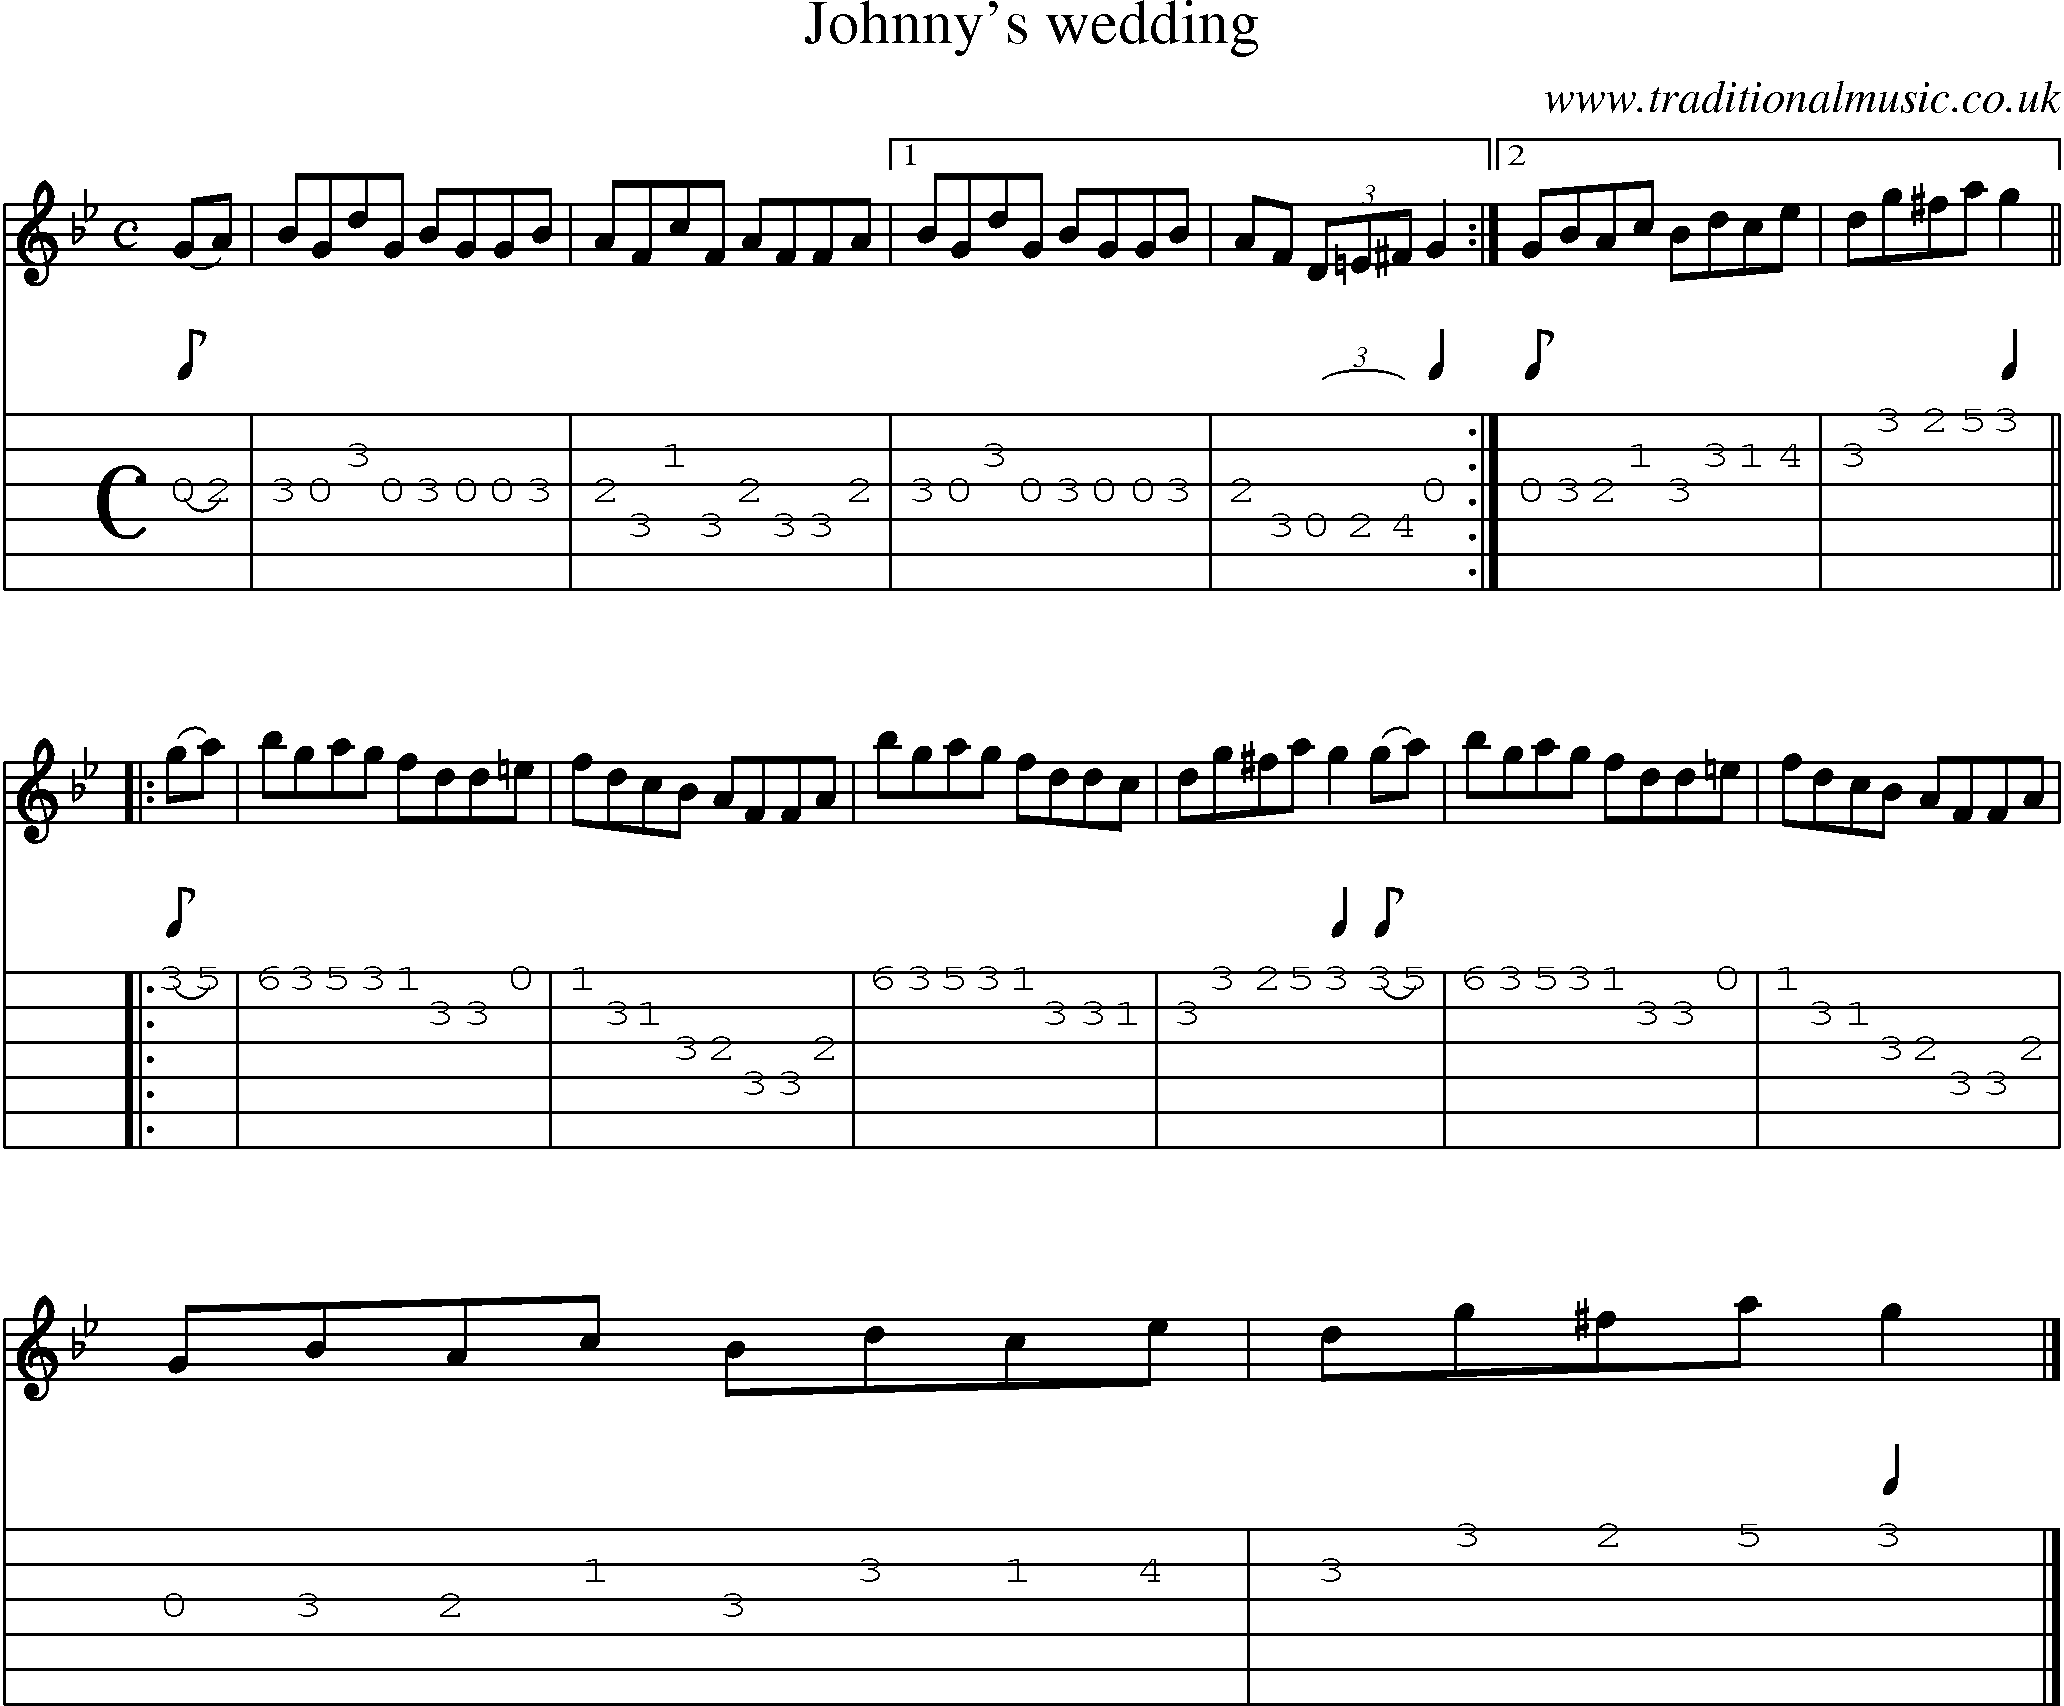 Music Score and Guitar Tabs for Johnnys Wedding